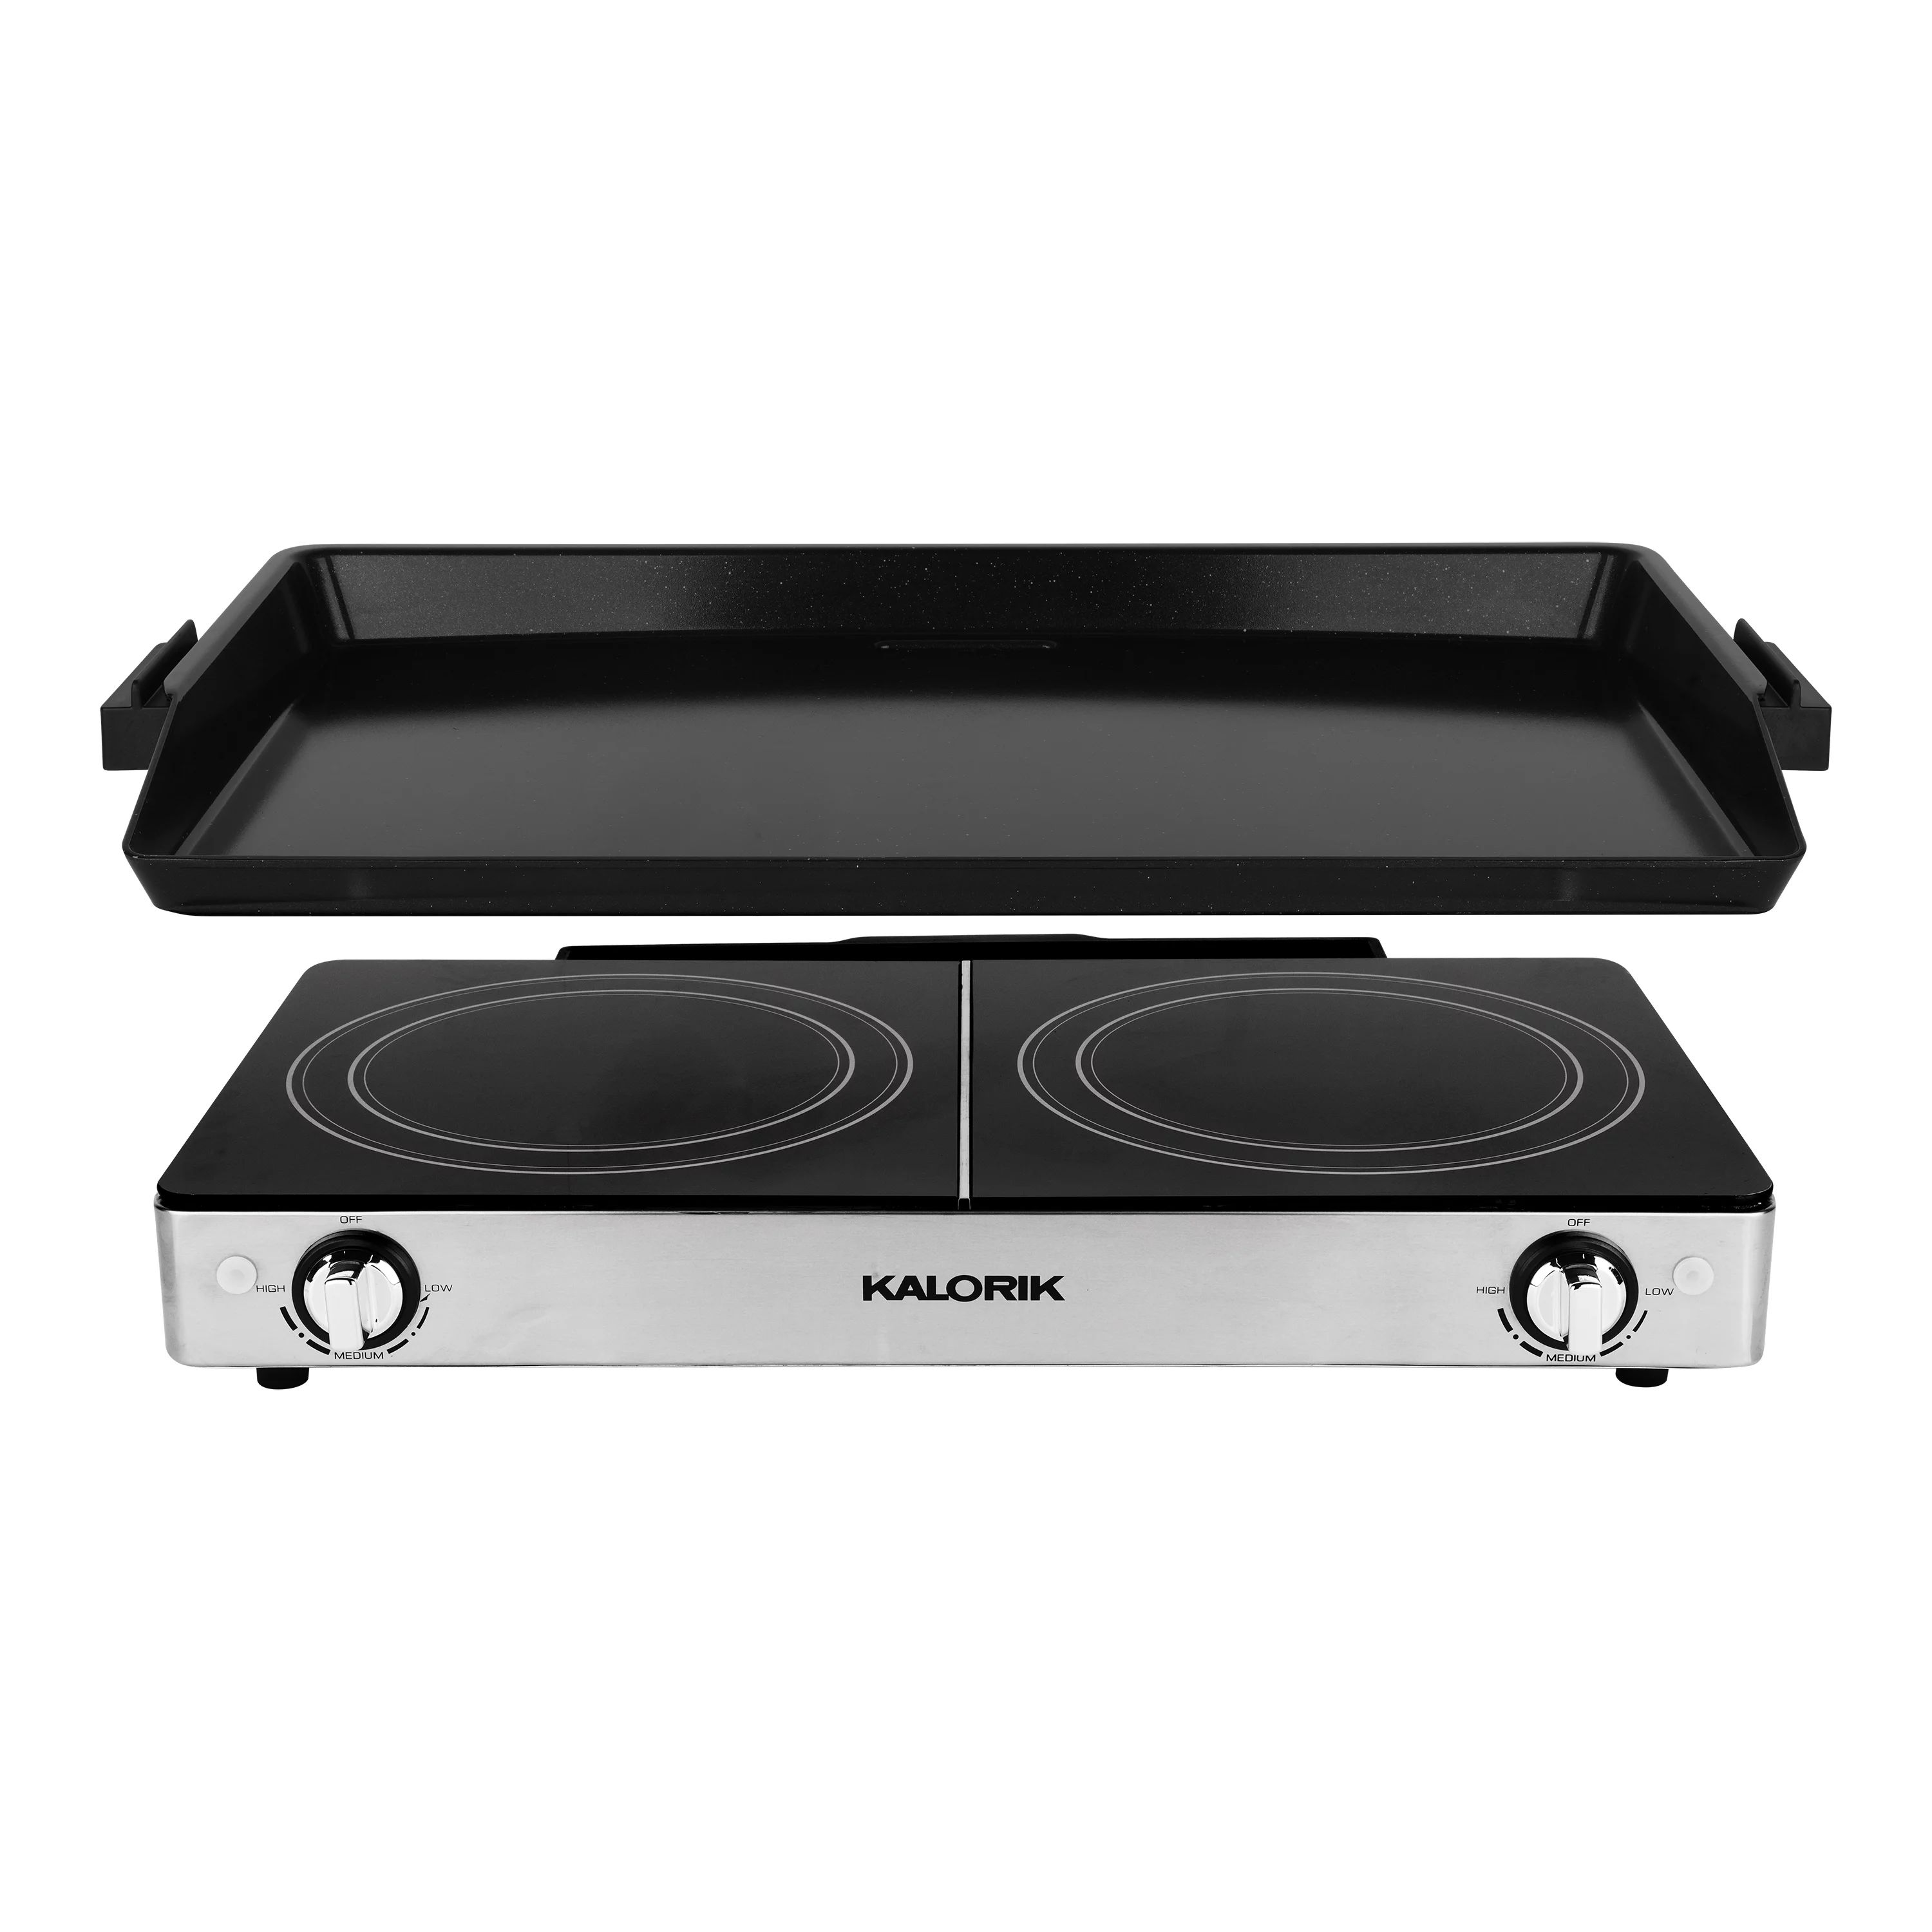 Kalorik® Pro Double Griddle and Cooktop, Stainless Steel | Walmart (US)